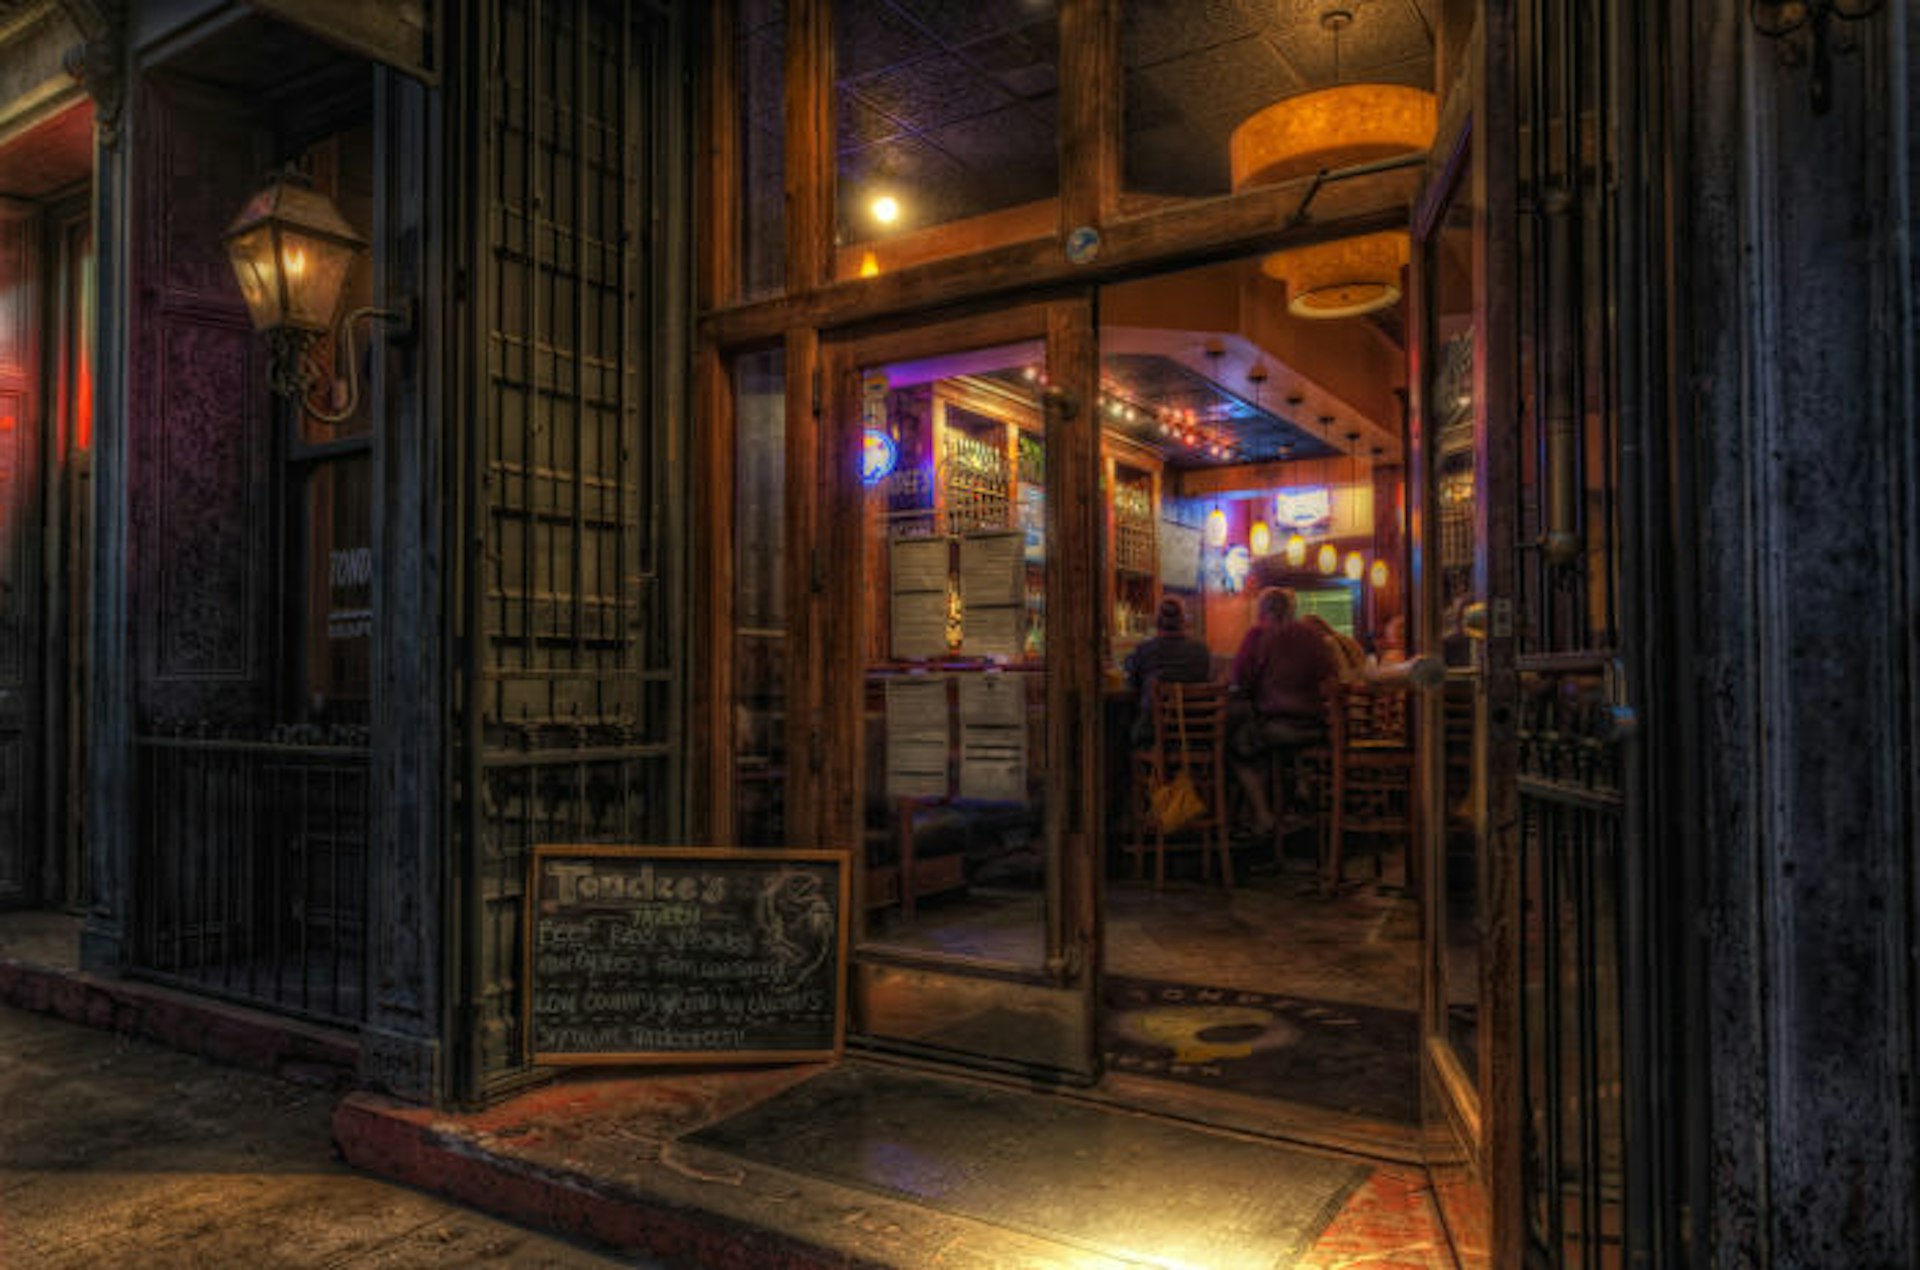 The exterior of a spooky-looking bar in Savannah